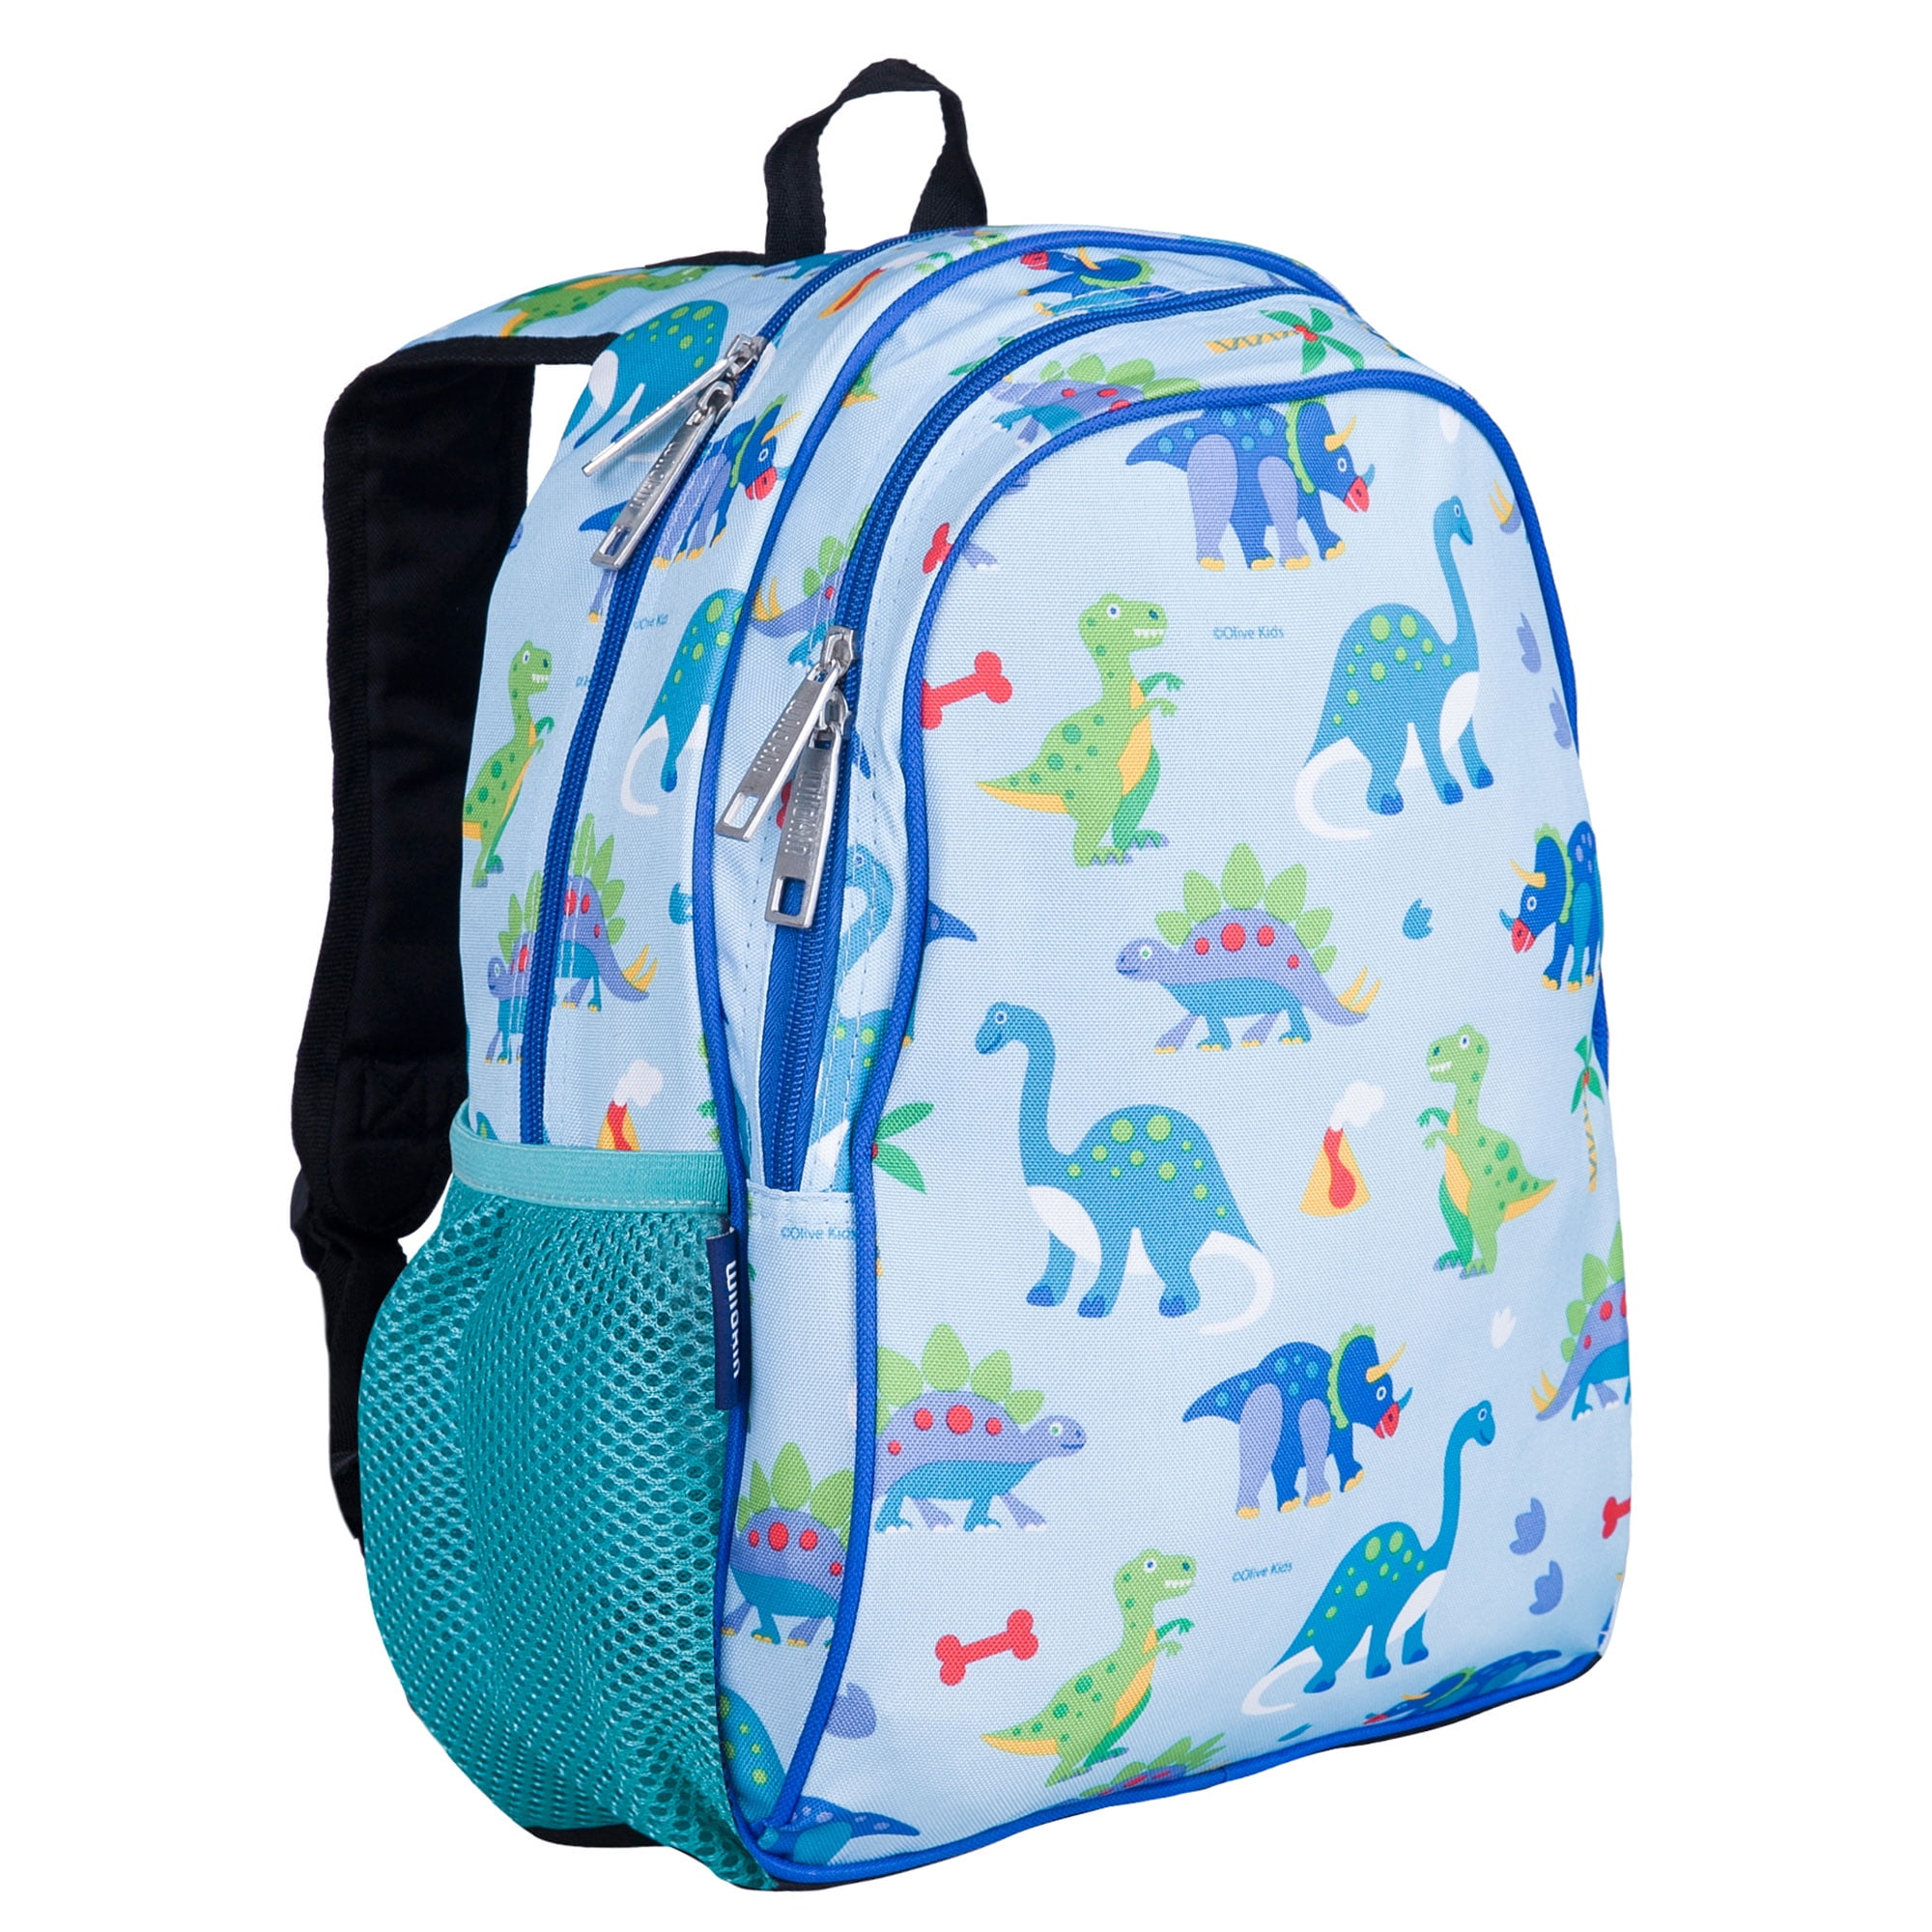 Wildkin Kids 15 Inch School and Travel Backpack for Boys and Girls